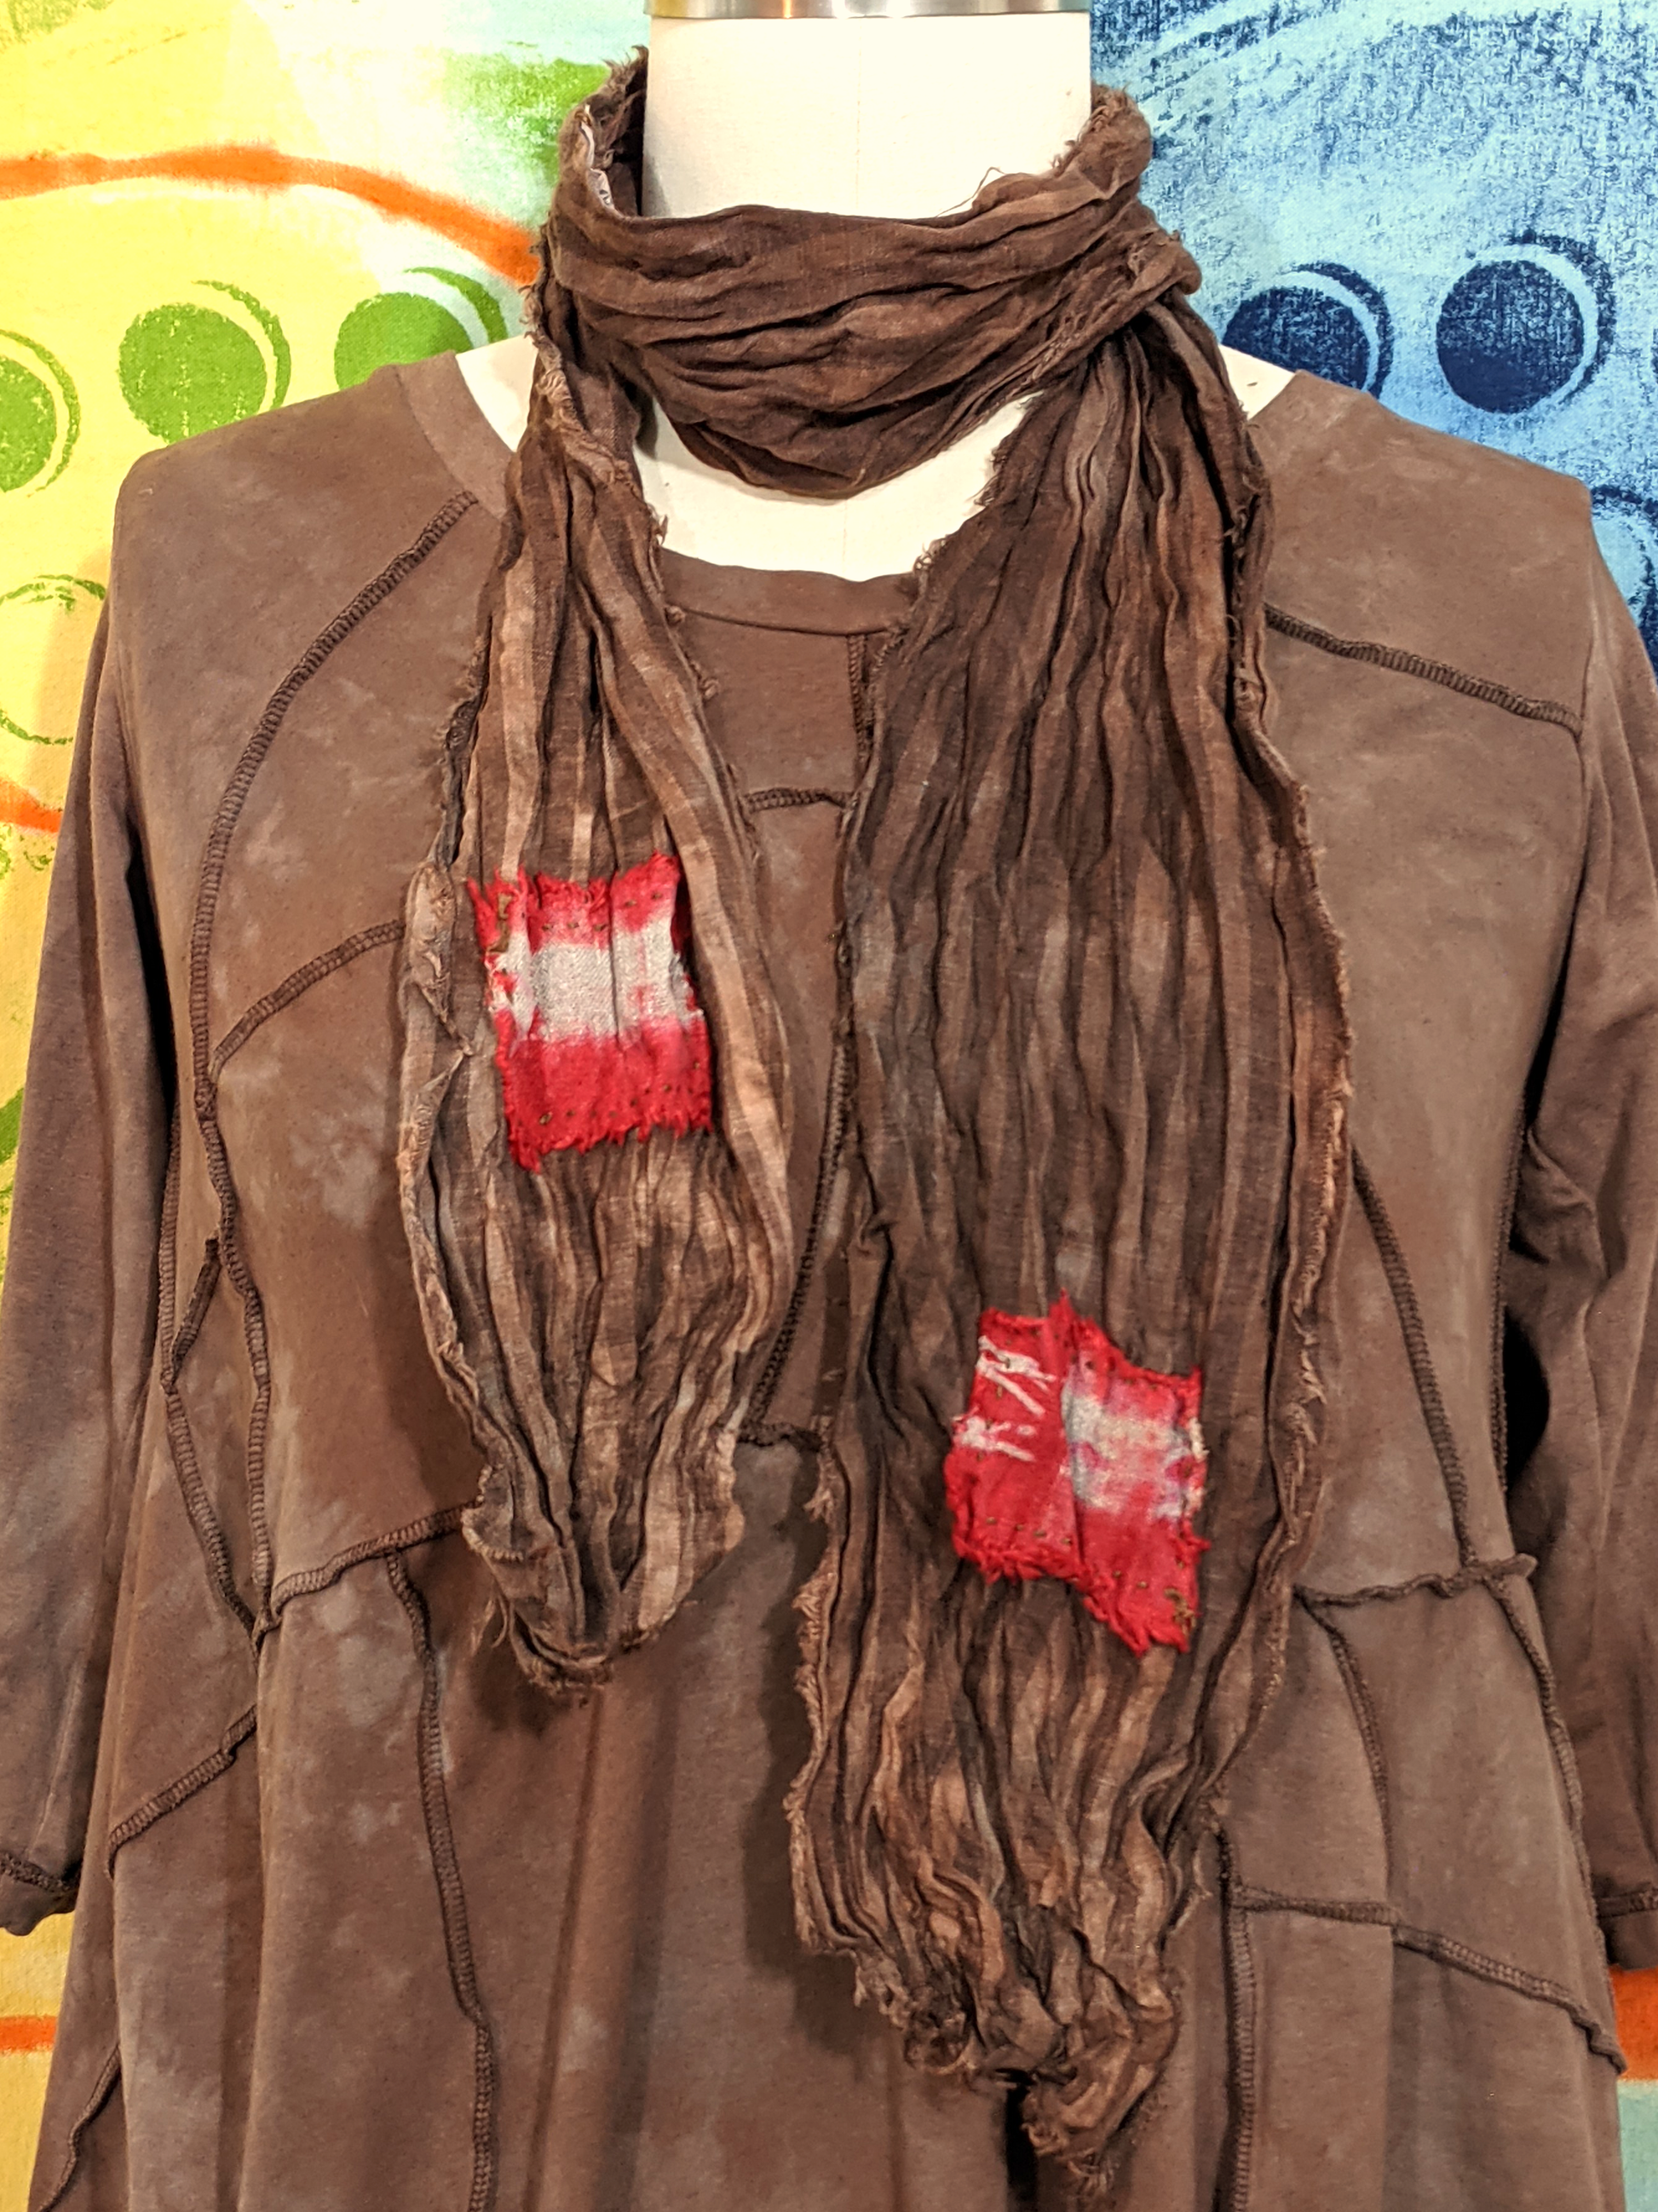 earthenware: hand-dyed striped linen scarf with hand-stitched patches secret lentil